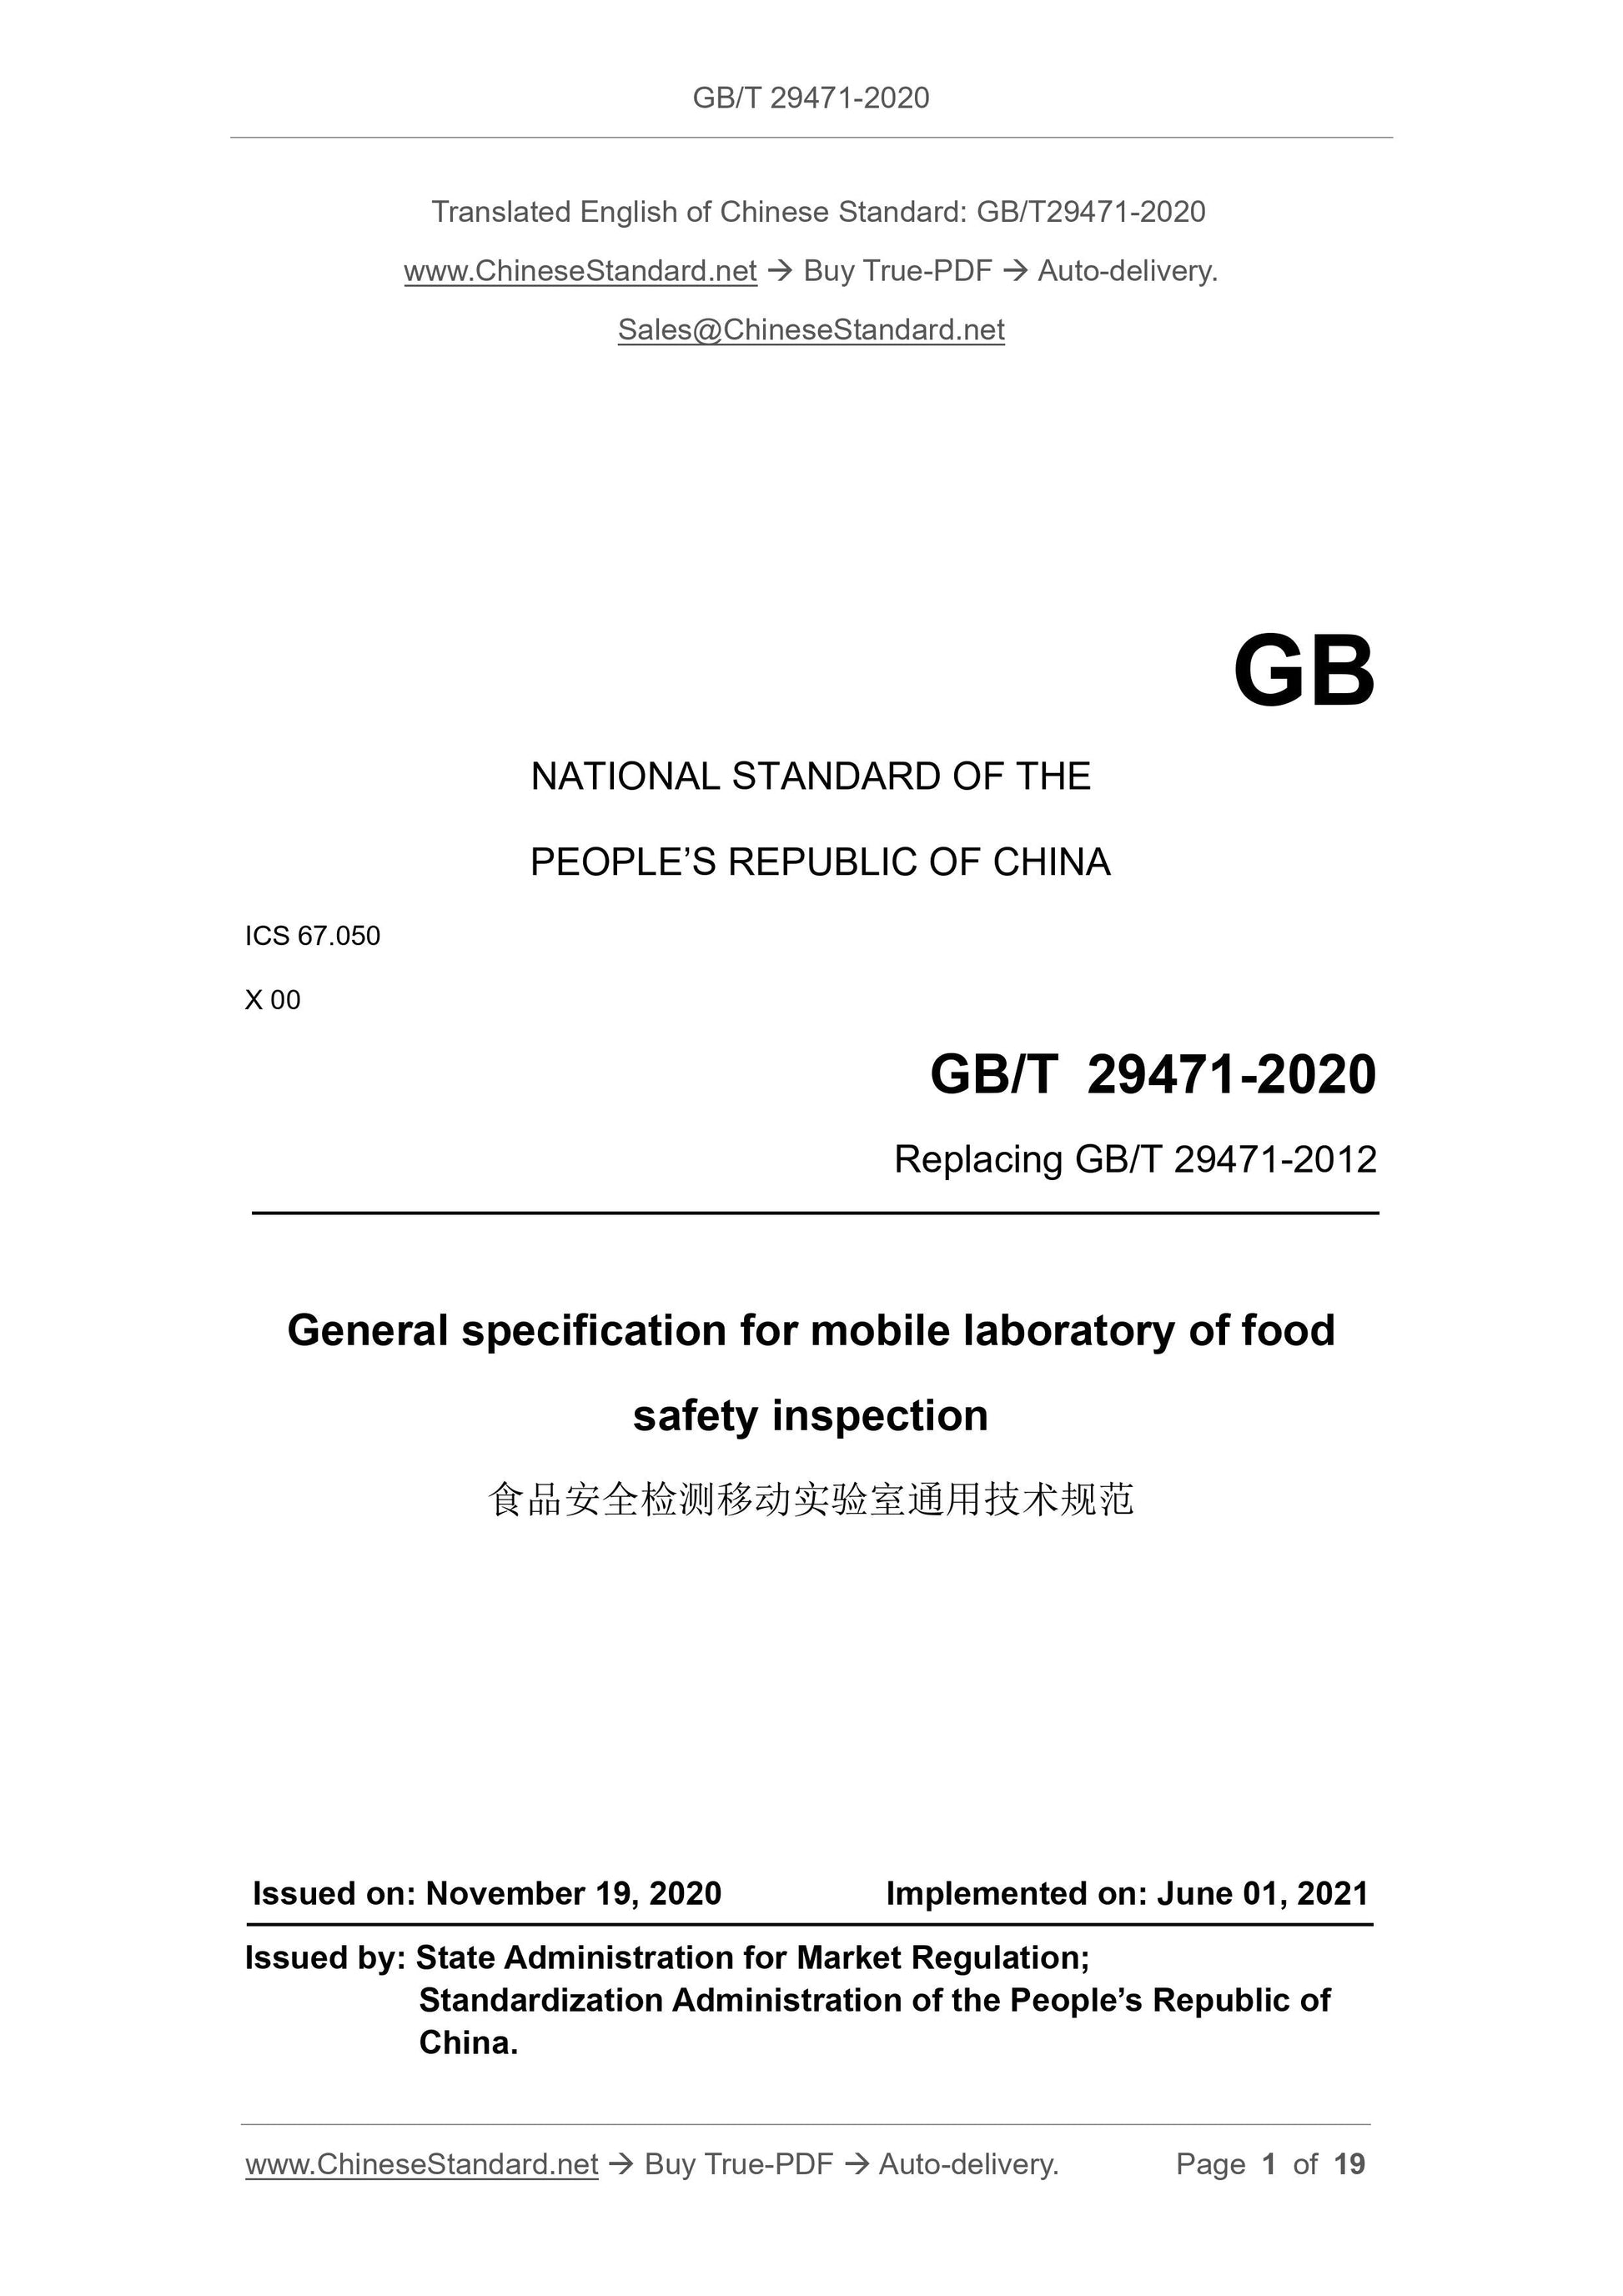 GB/T 29471-2020 Page 1